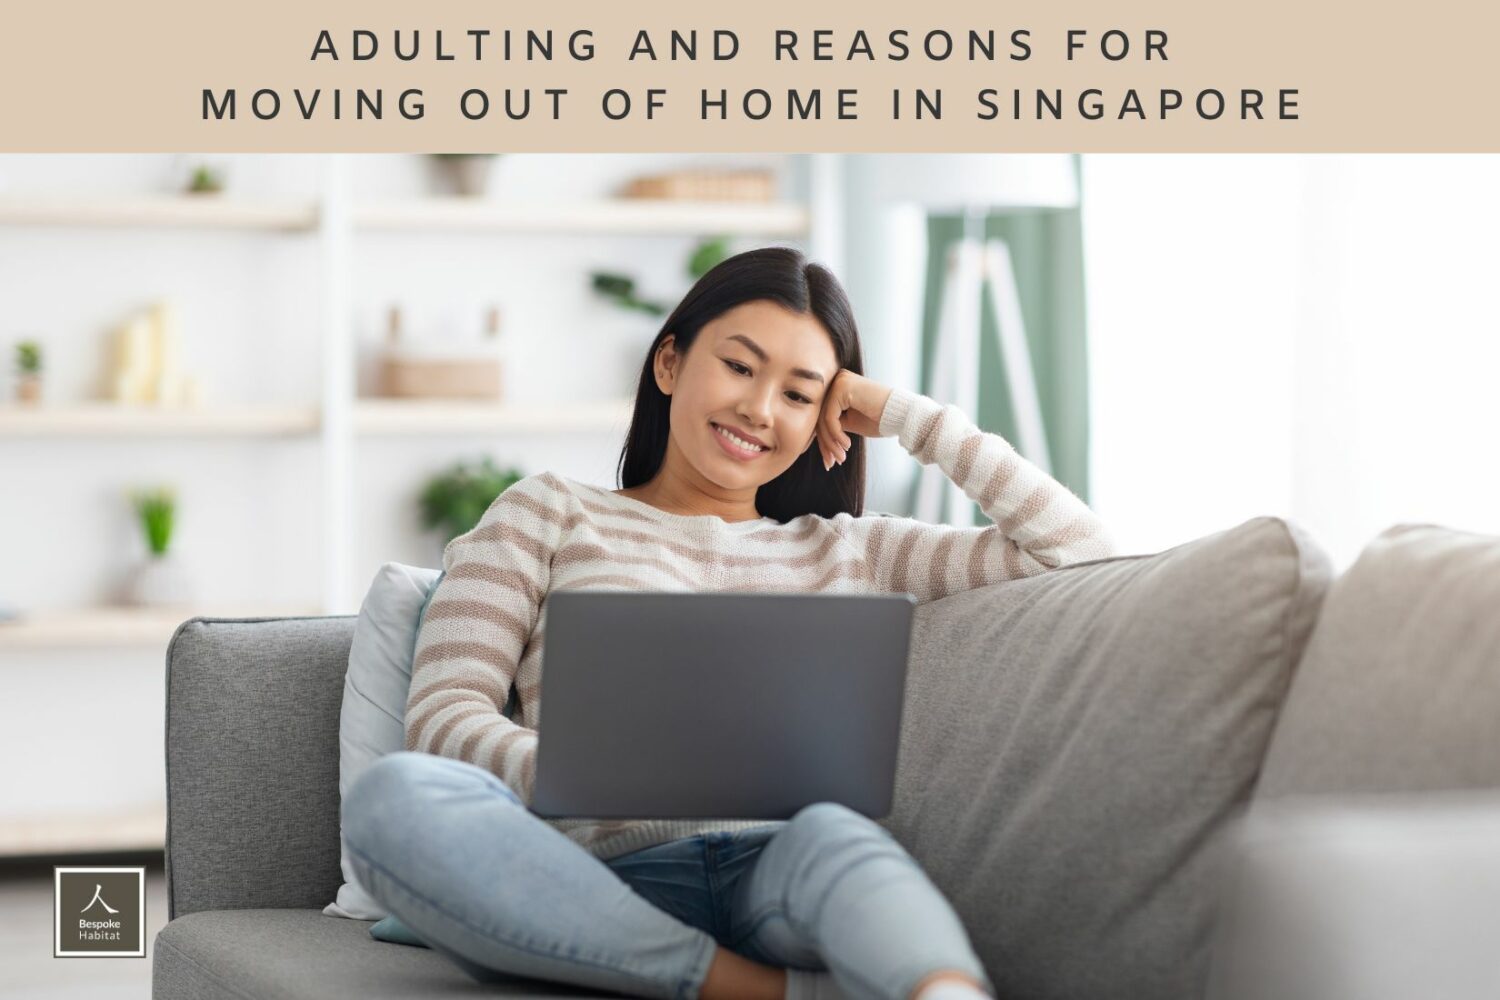 Adulting and Reasons for Moving Out of Home in Singapore